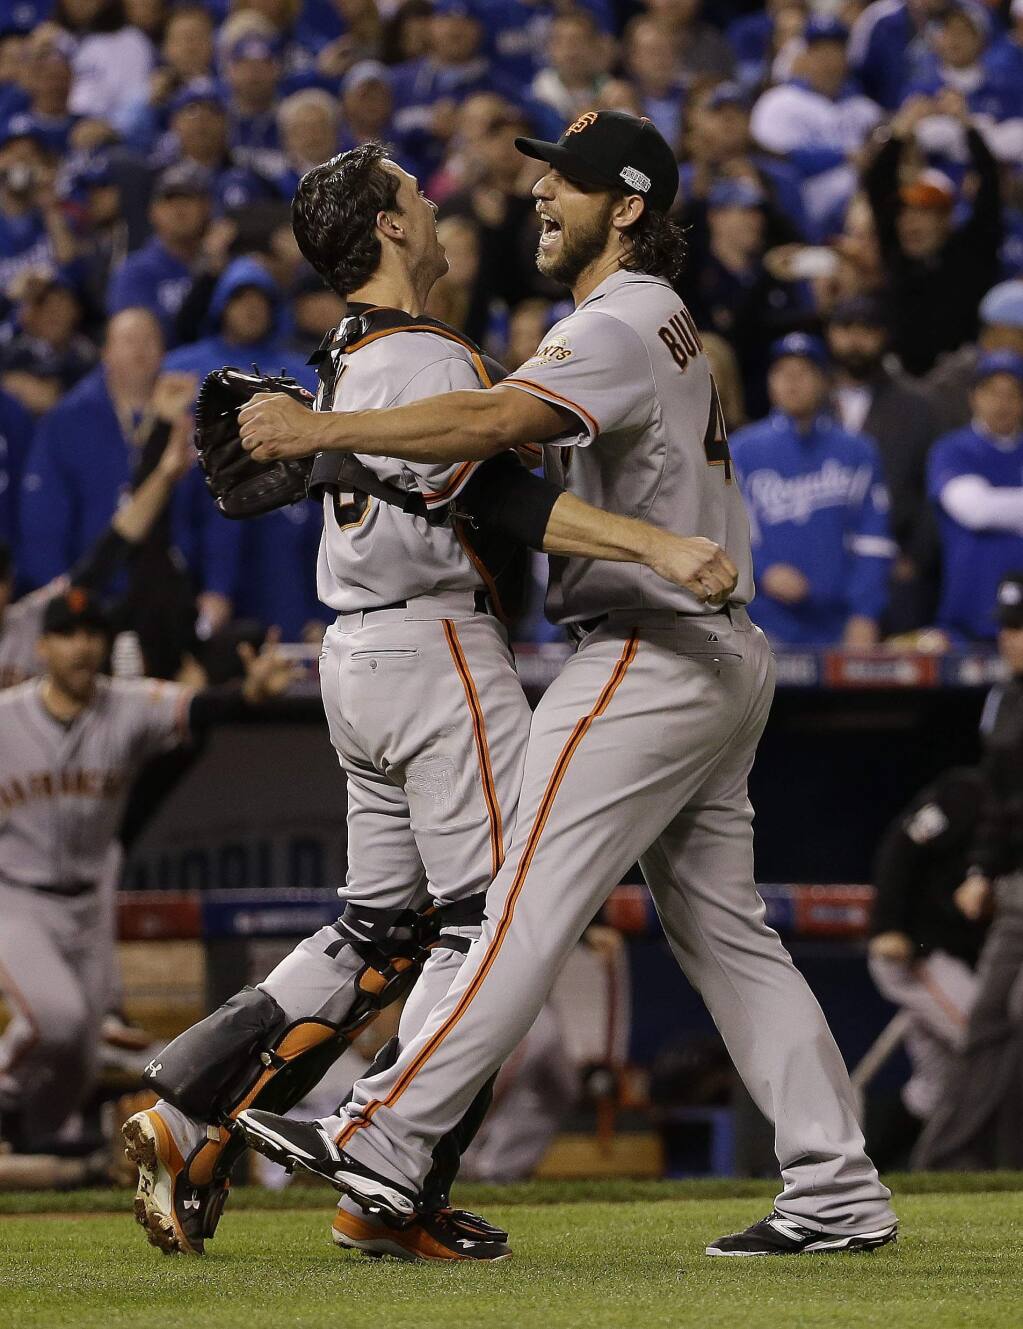 Buster Posey & Madison Bumgarner celebrate winning Game 7 of the